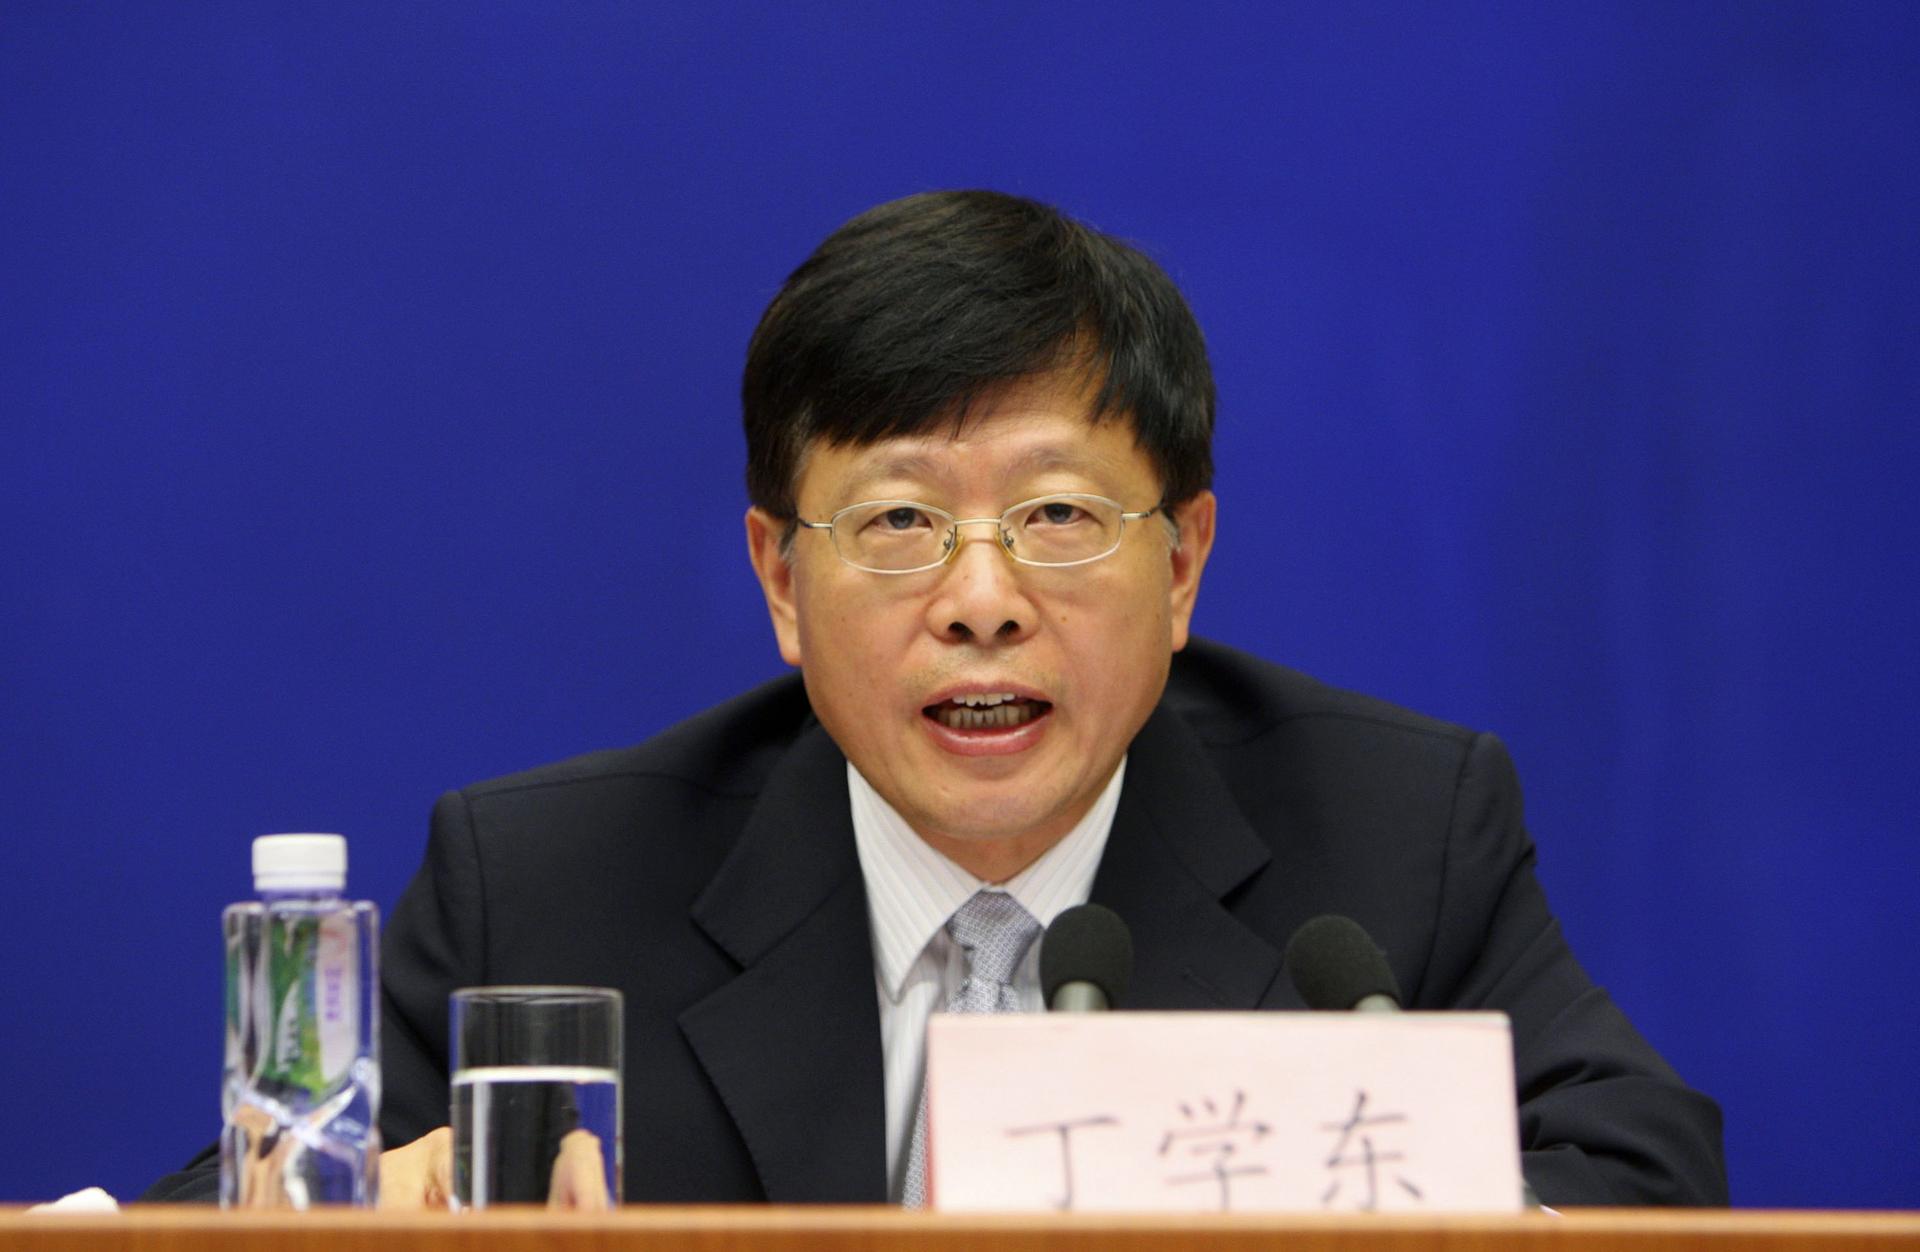 CIC chairman Ding Xuedong says earnings rose as global asset prices increased thanks to a burgeoning economic recovery. Photo: Reuters